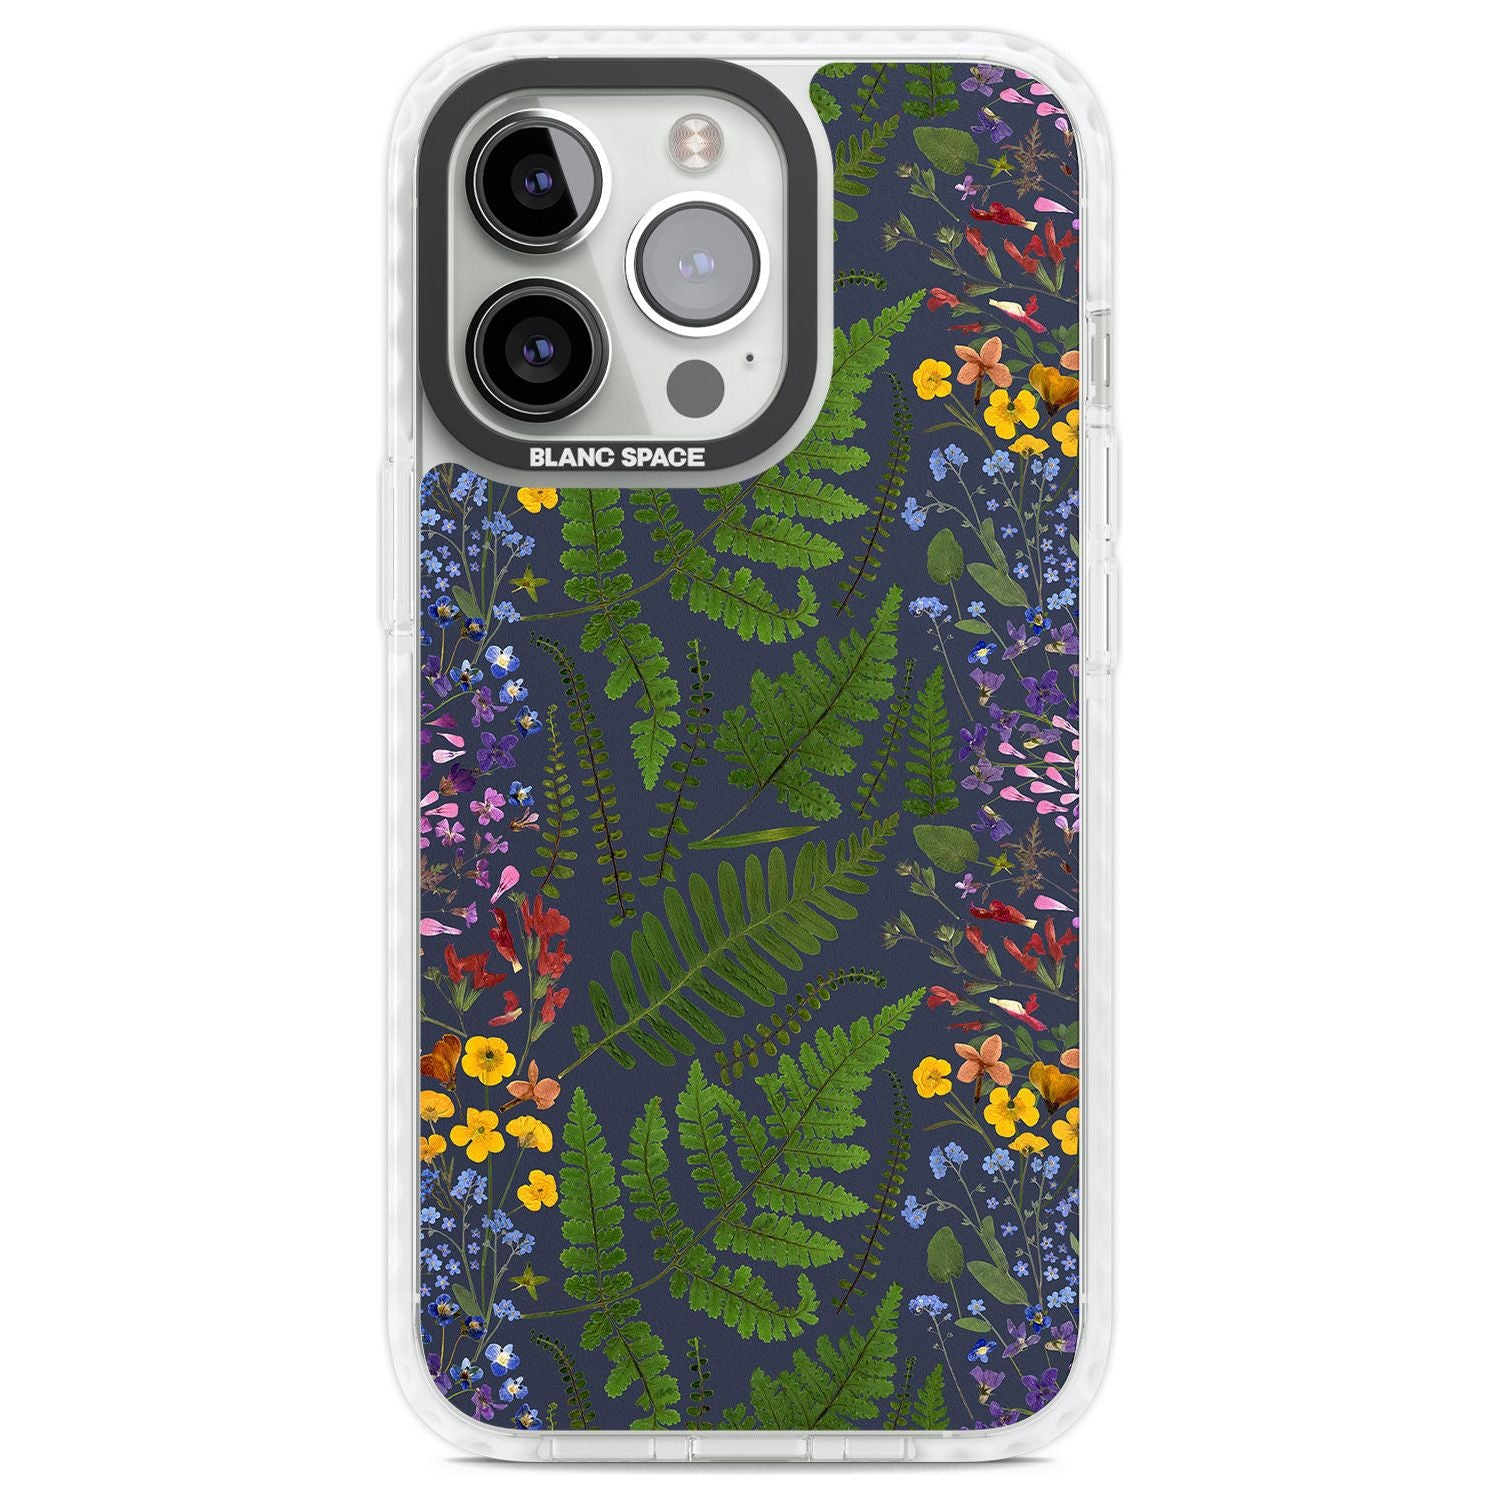 Busy Floral and Fern Design - Navy Phone Case iPhone 13 Pro / Impact Case,iPhone 14 Pro / Impact Case,iPhone 15 Pro Max / Impact Case,iPhone 15 Pro / Impact Case Blanc Space